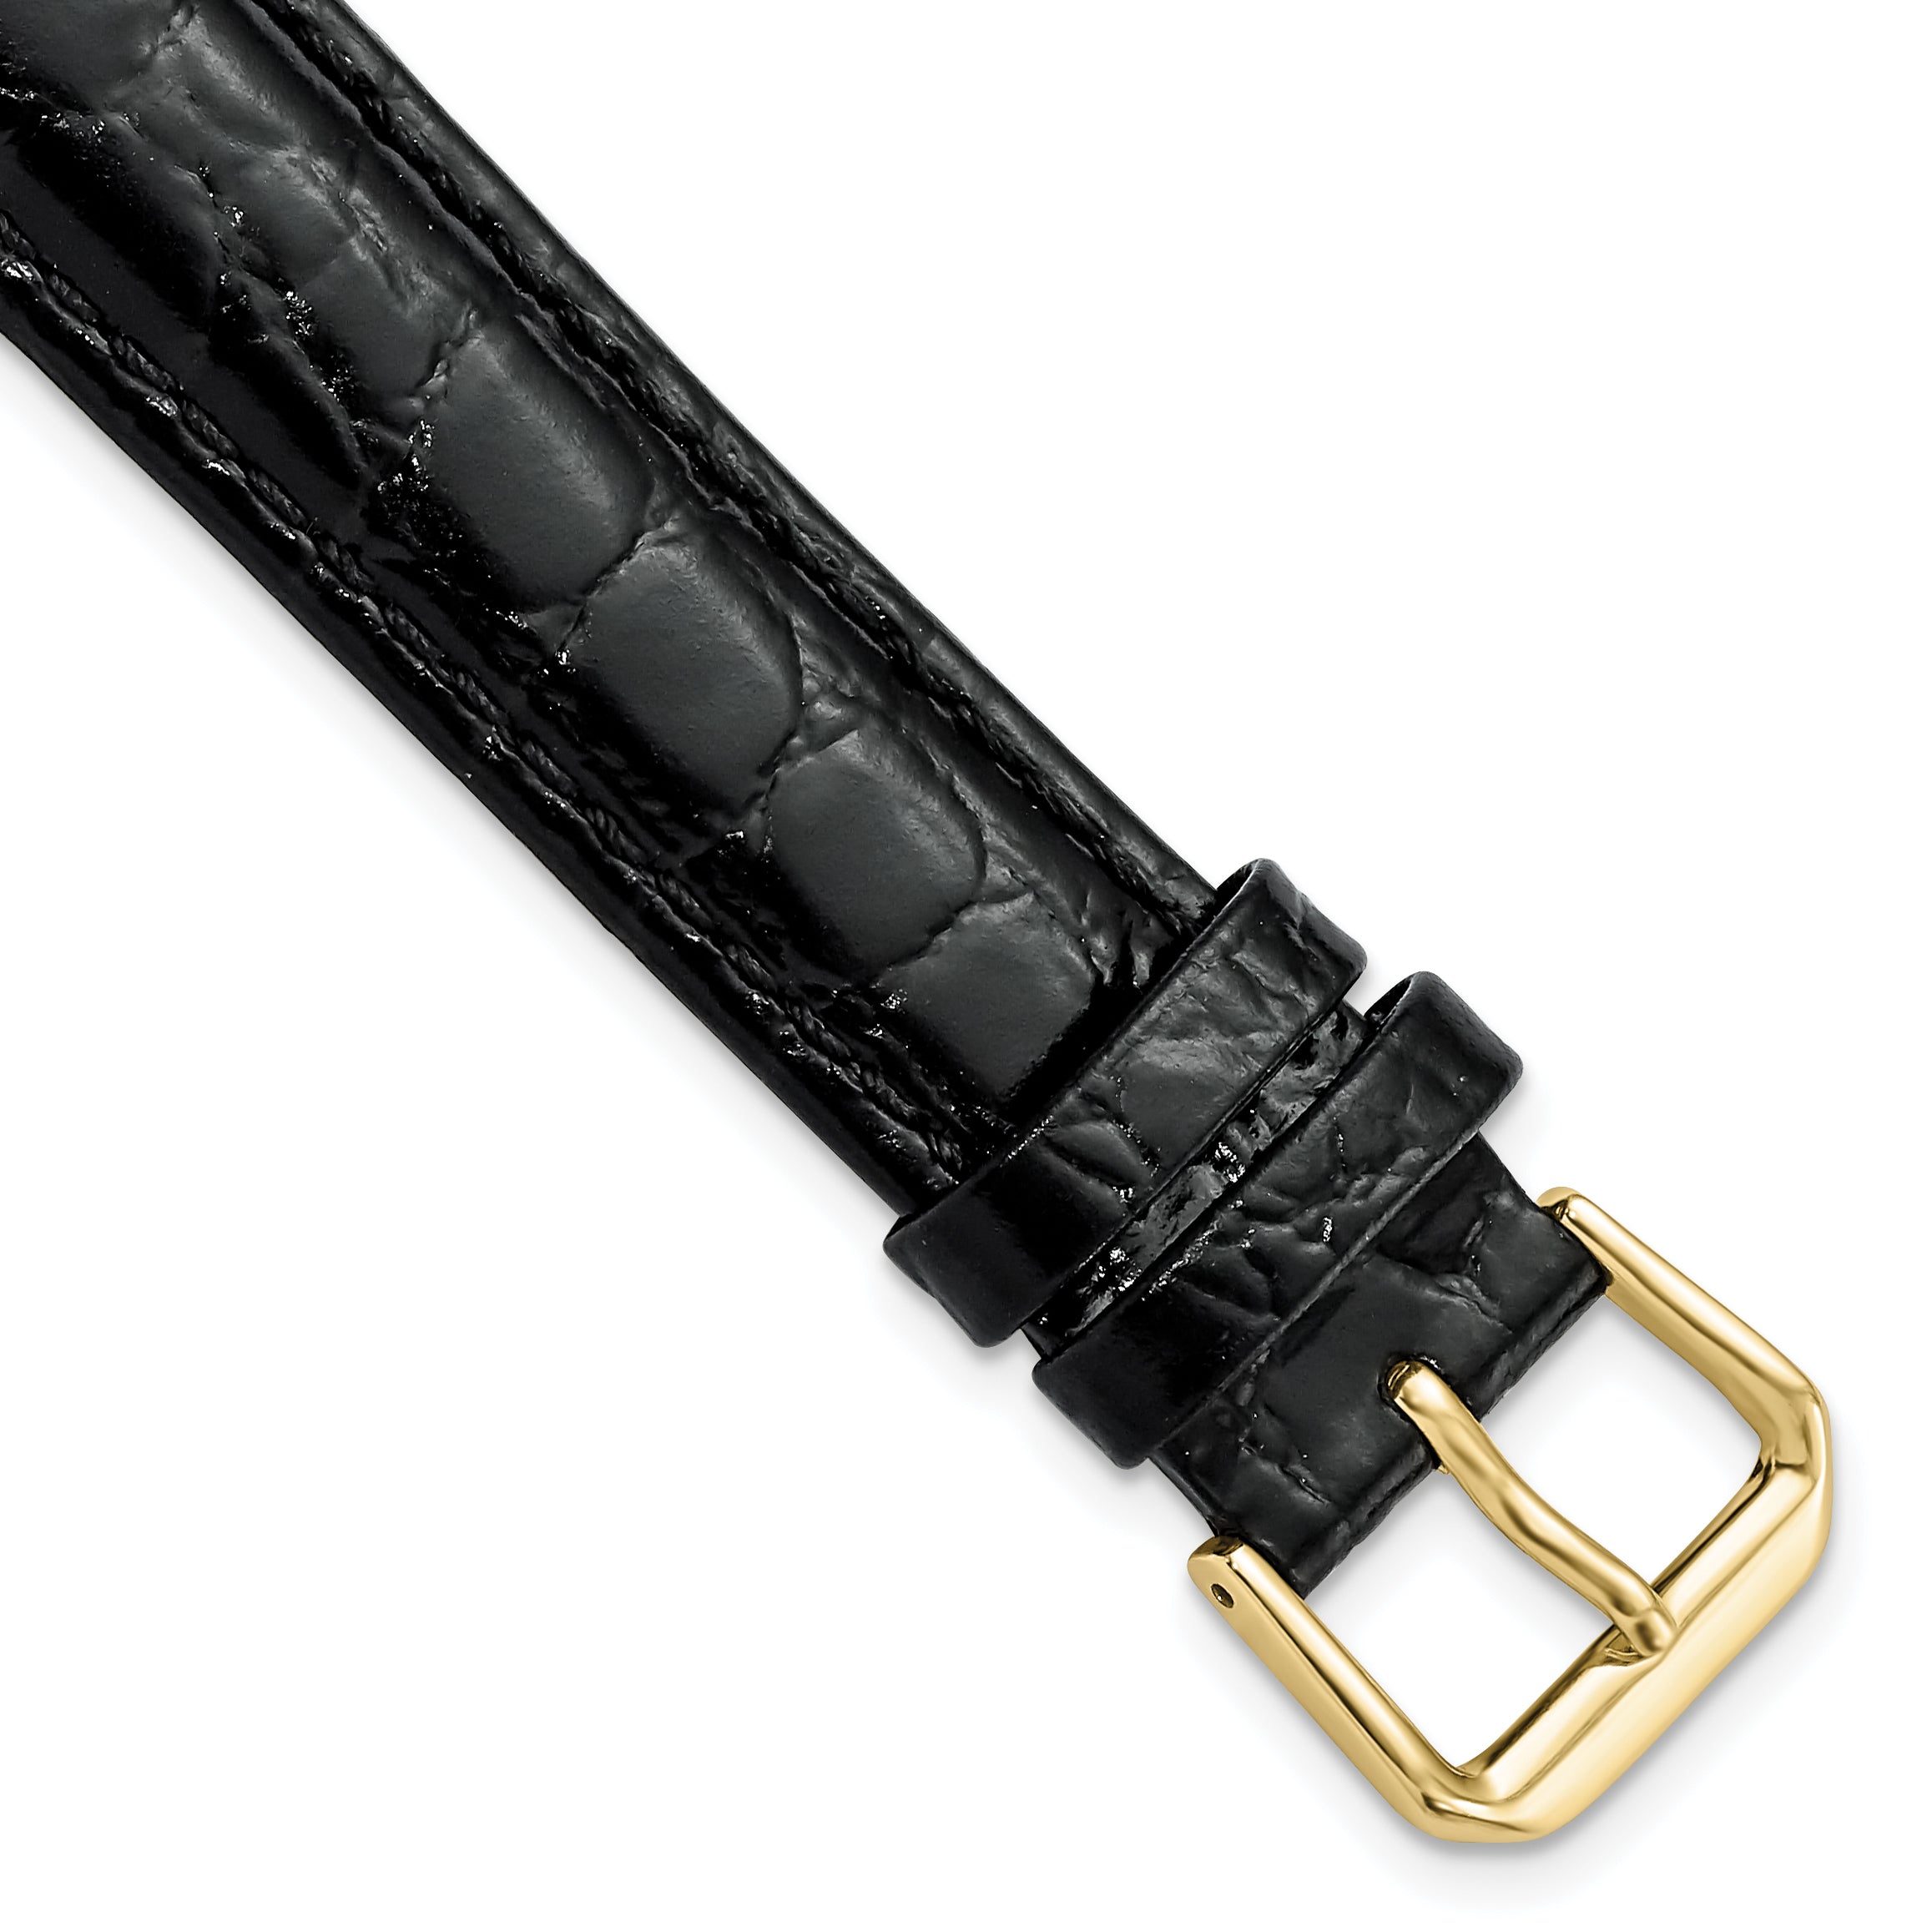 DeBeer 18mm Extra Long Black Alligator Grain Leather with Gold-tone Buckle 9.5 inch Watch Band